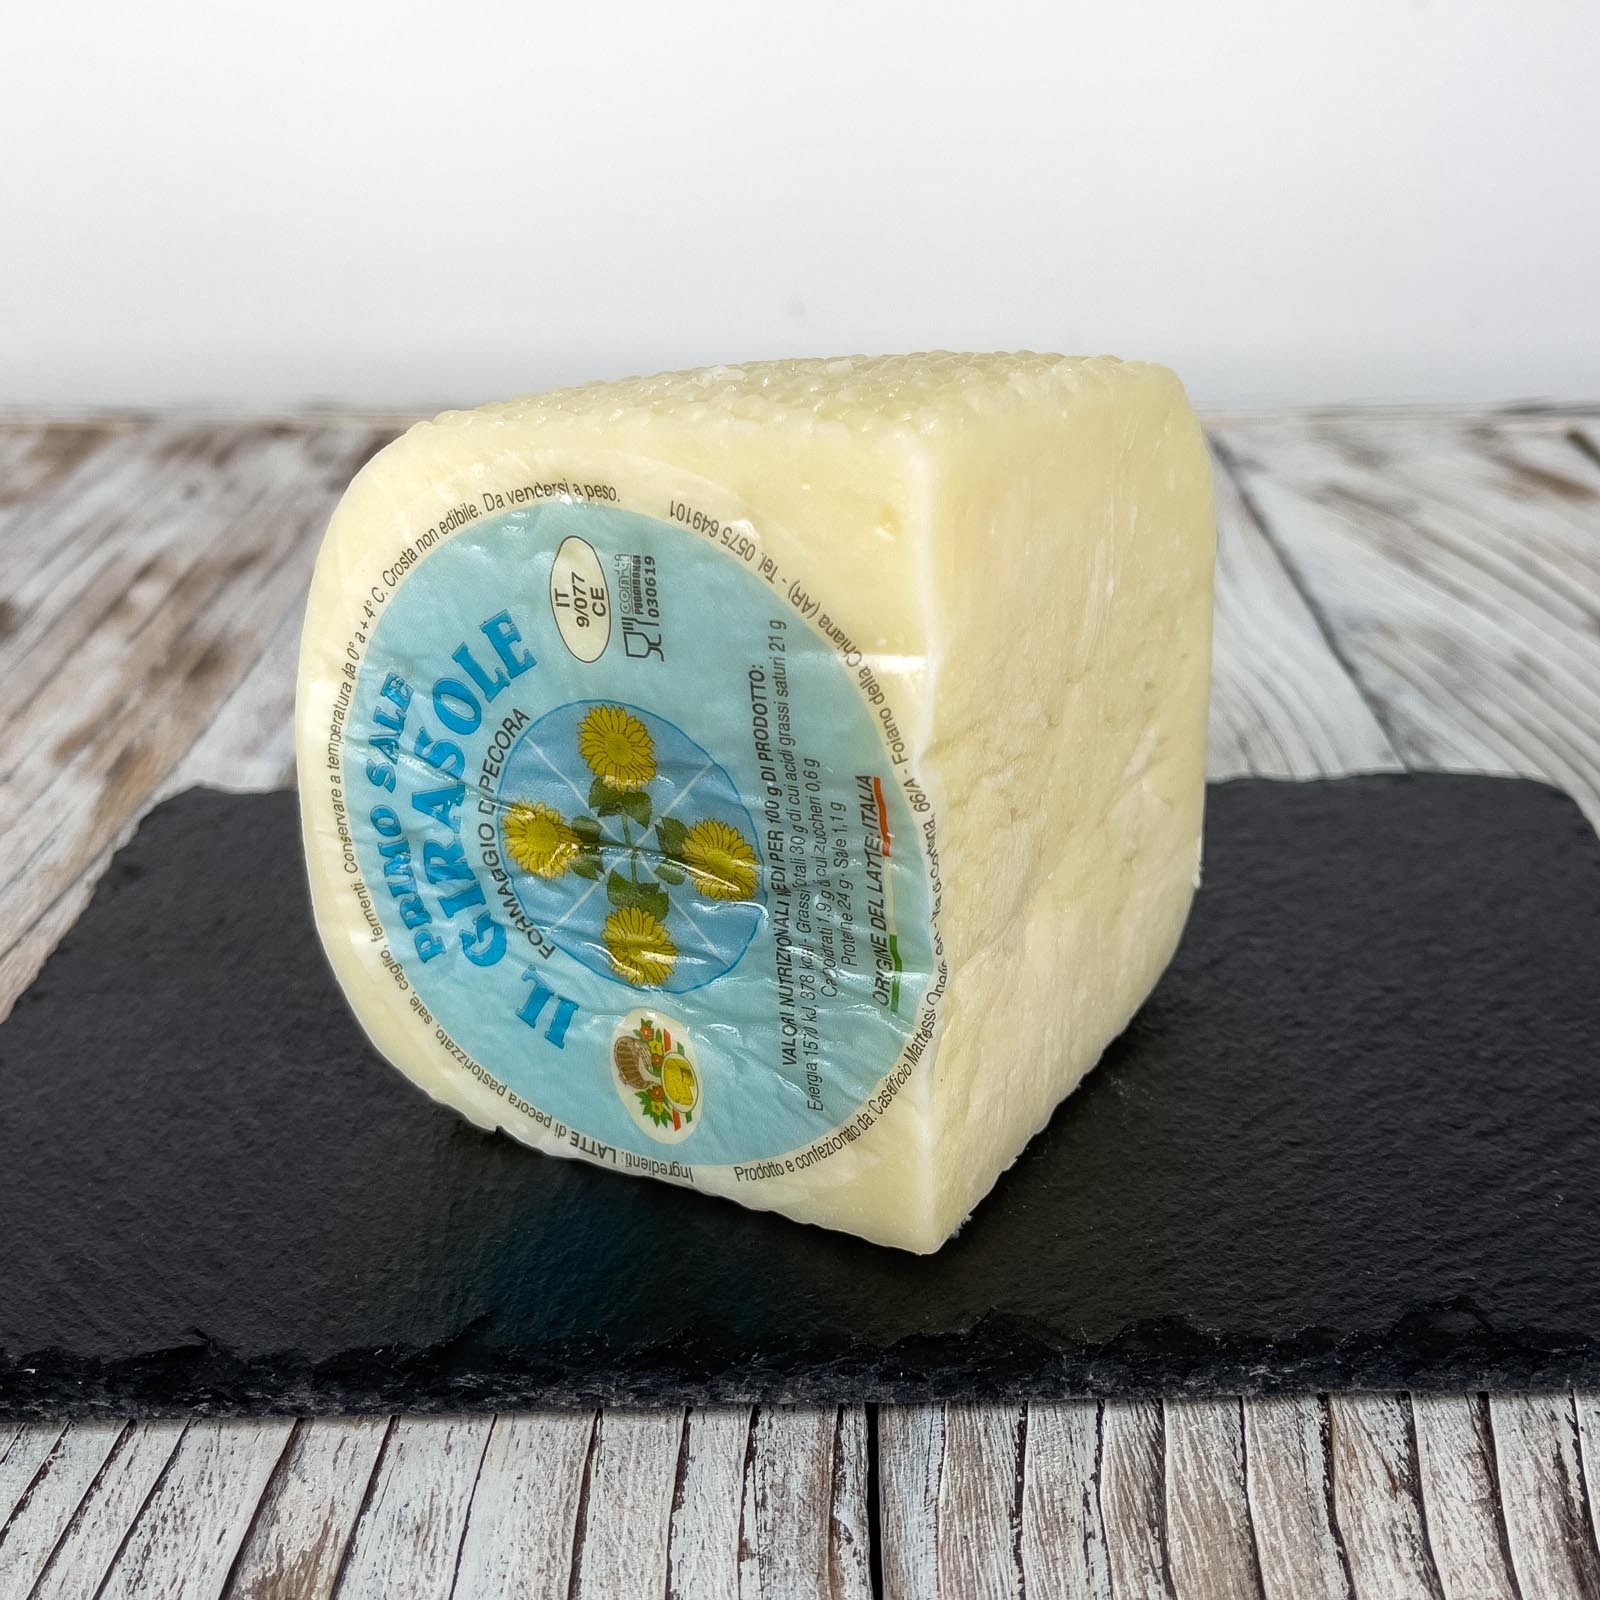 “Primo Sale” Slightly Aged Pecorino Cheese is a typical Tuscan soft cheese, obtained from first choice whole sheep's milk, subjected to a short maturing process and vacuum packed. It is characterized by a sweet and light flavor, as well as a very fresh and delicate scent.